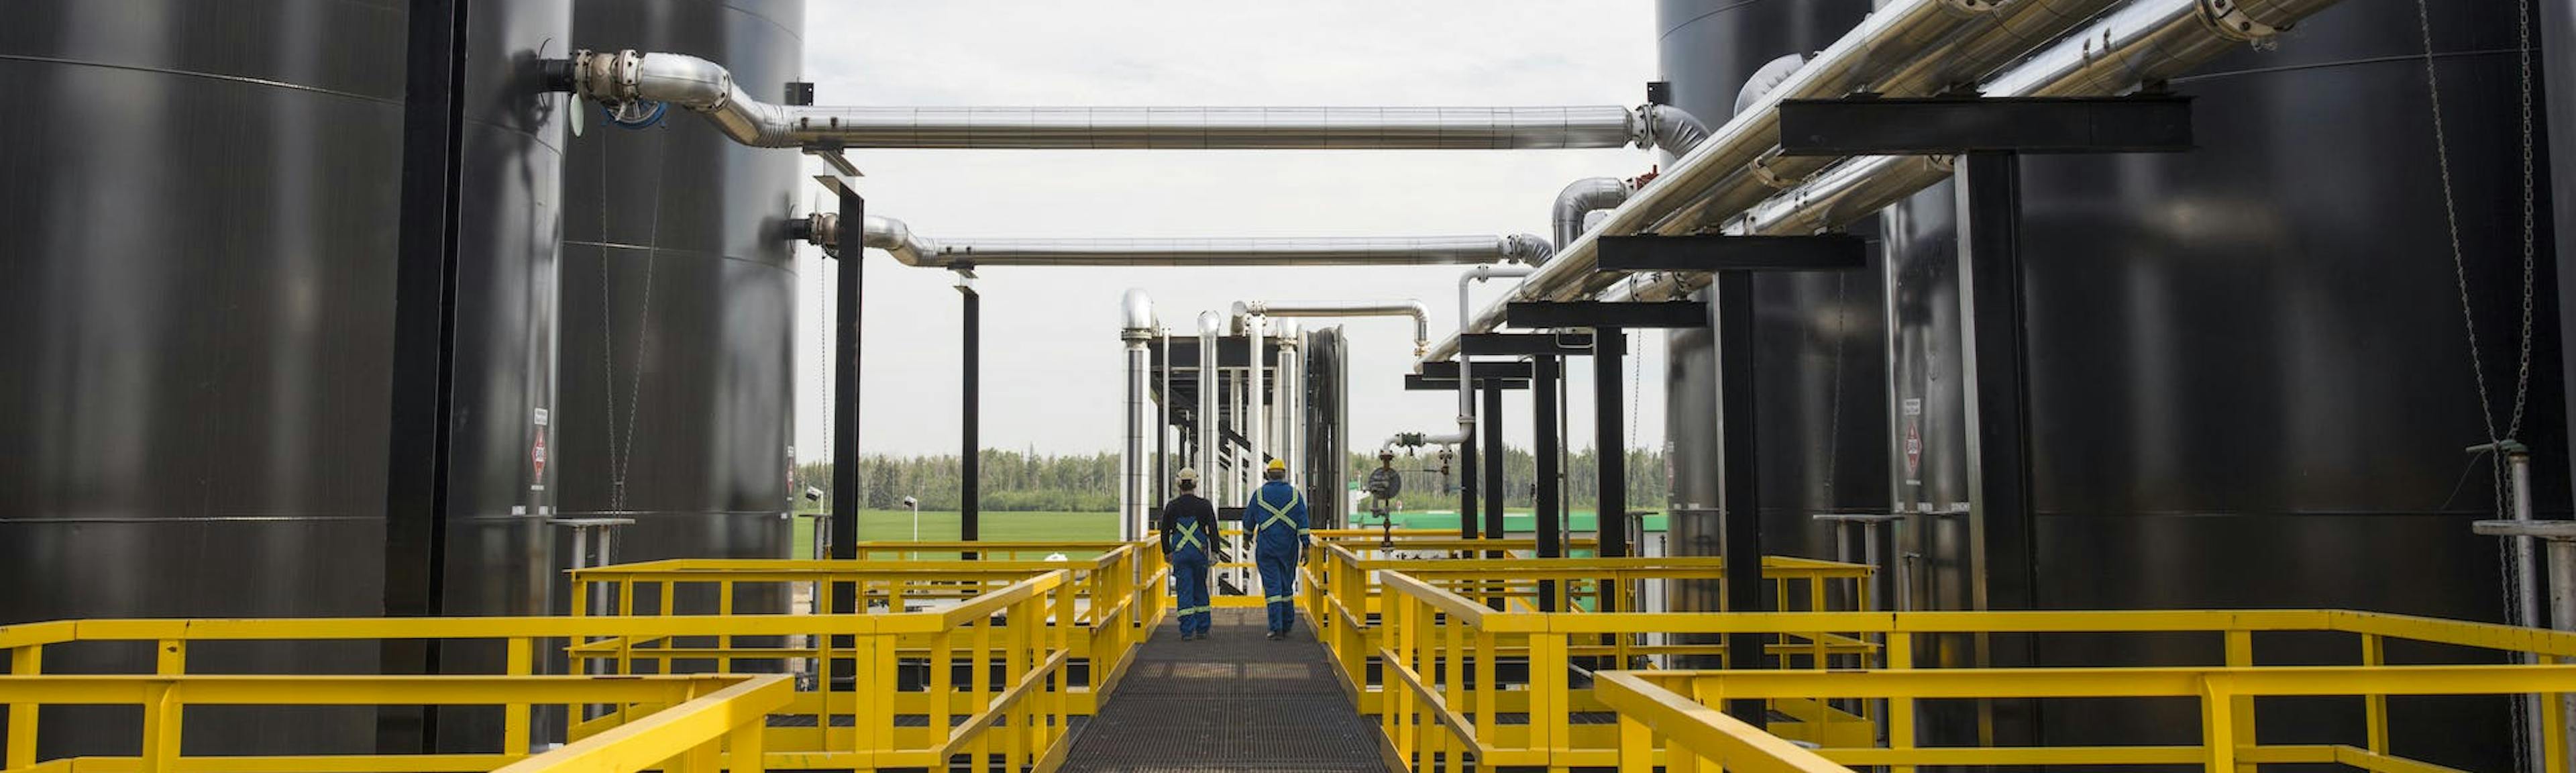 Two gas plant workers walk between large tanks on a walkway with yellow railings.